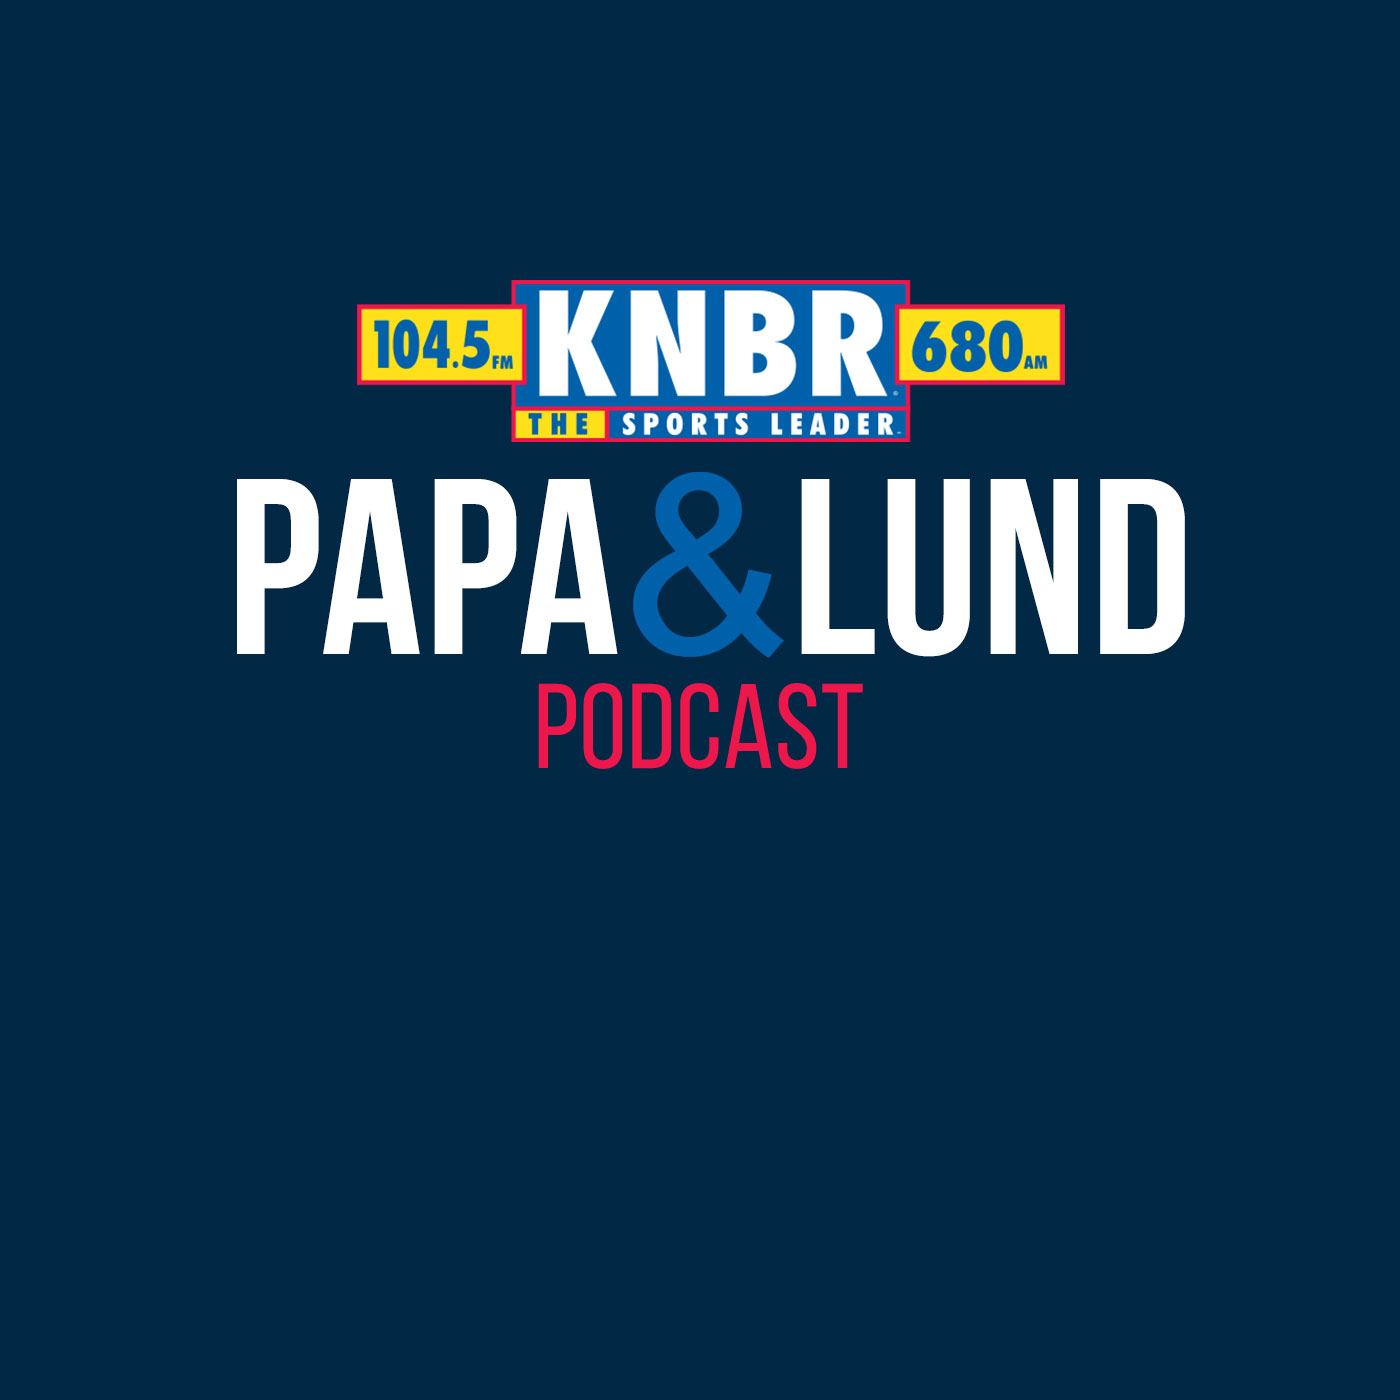 10-24 Joe Staley joins Papa & Lund to discuss another tough loss to the Chiefs on Alumni weekend and tells a story of his first impression of Bryant Young his rookie season